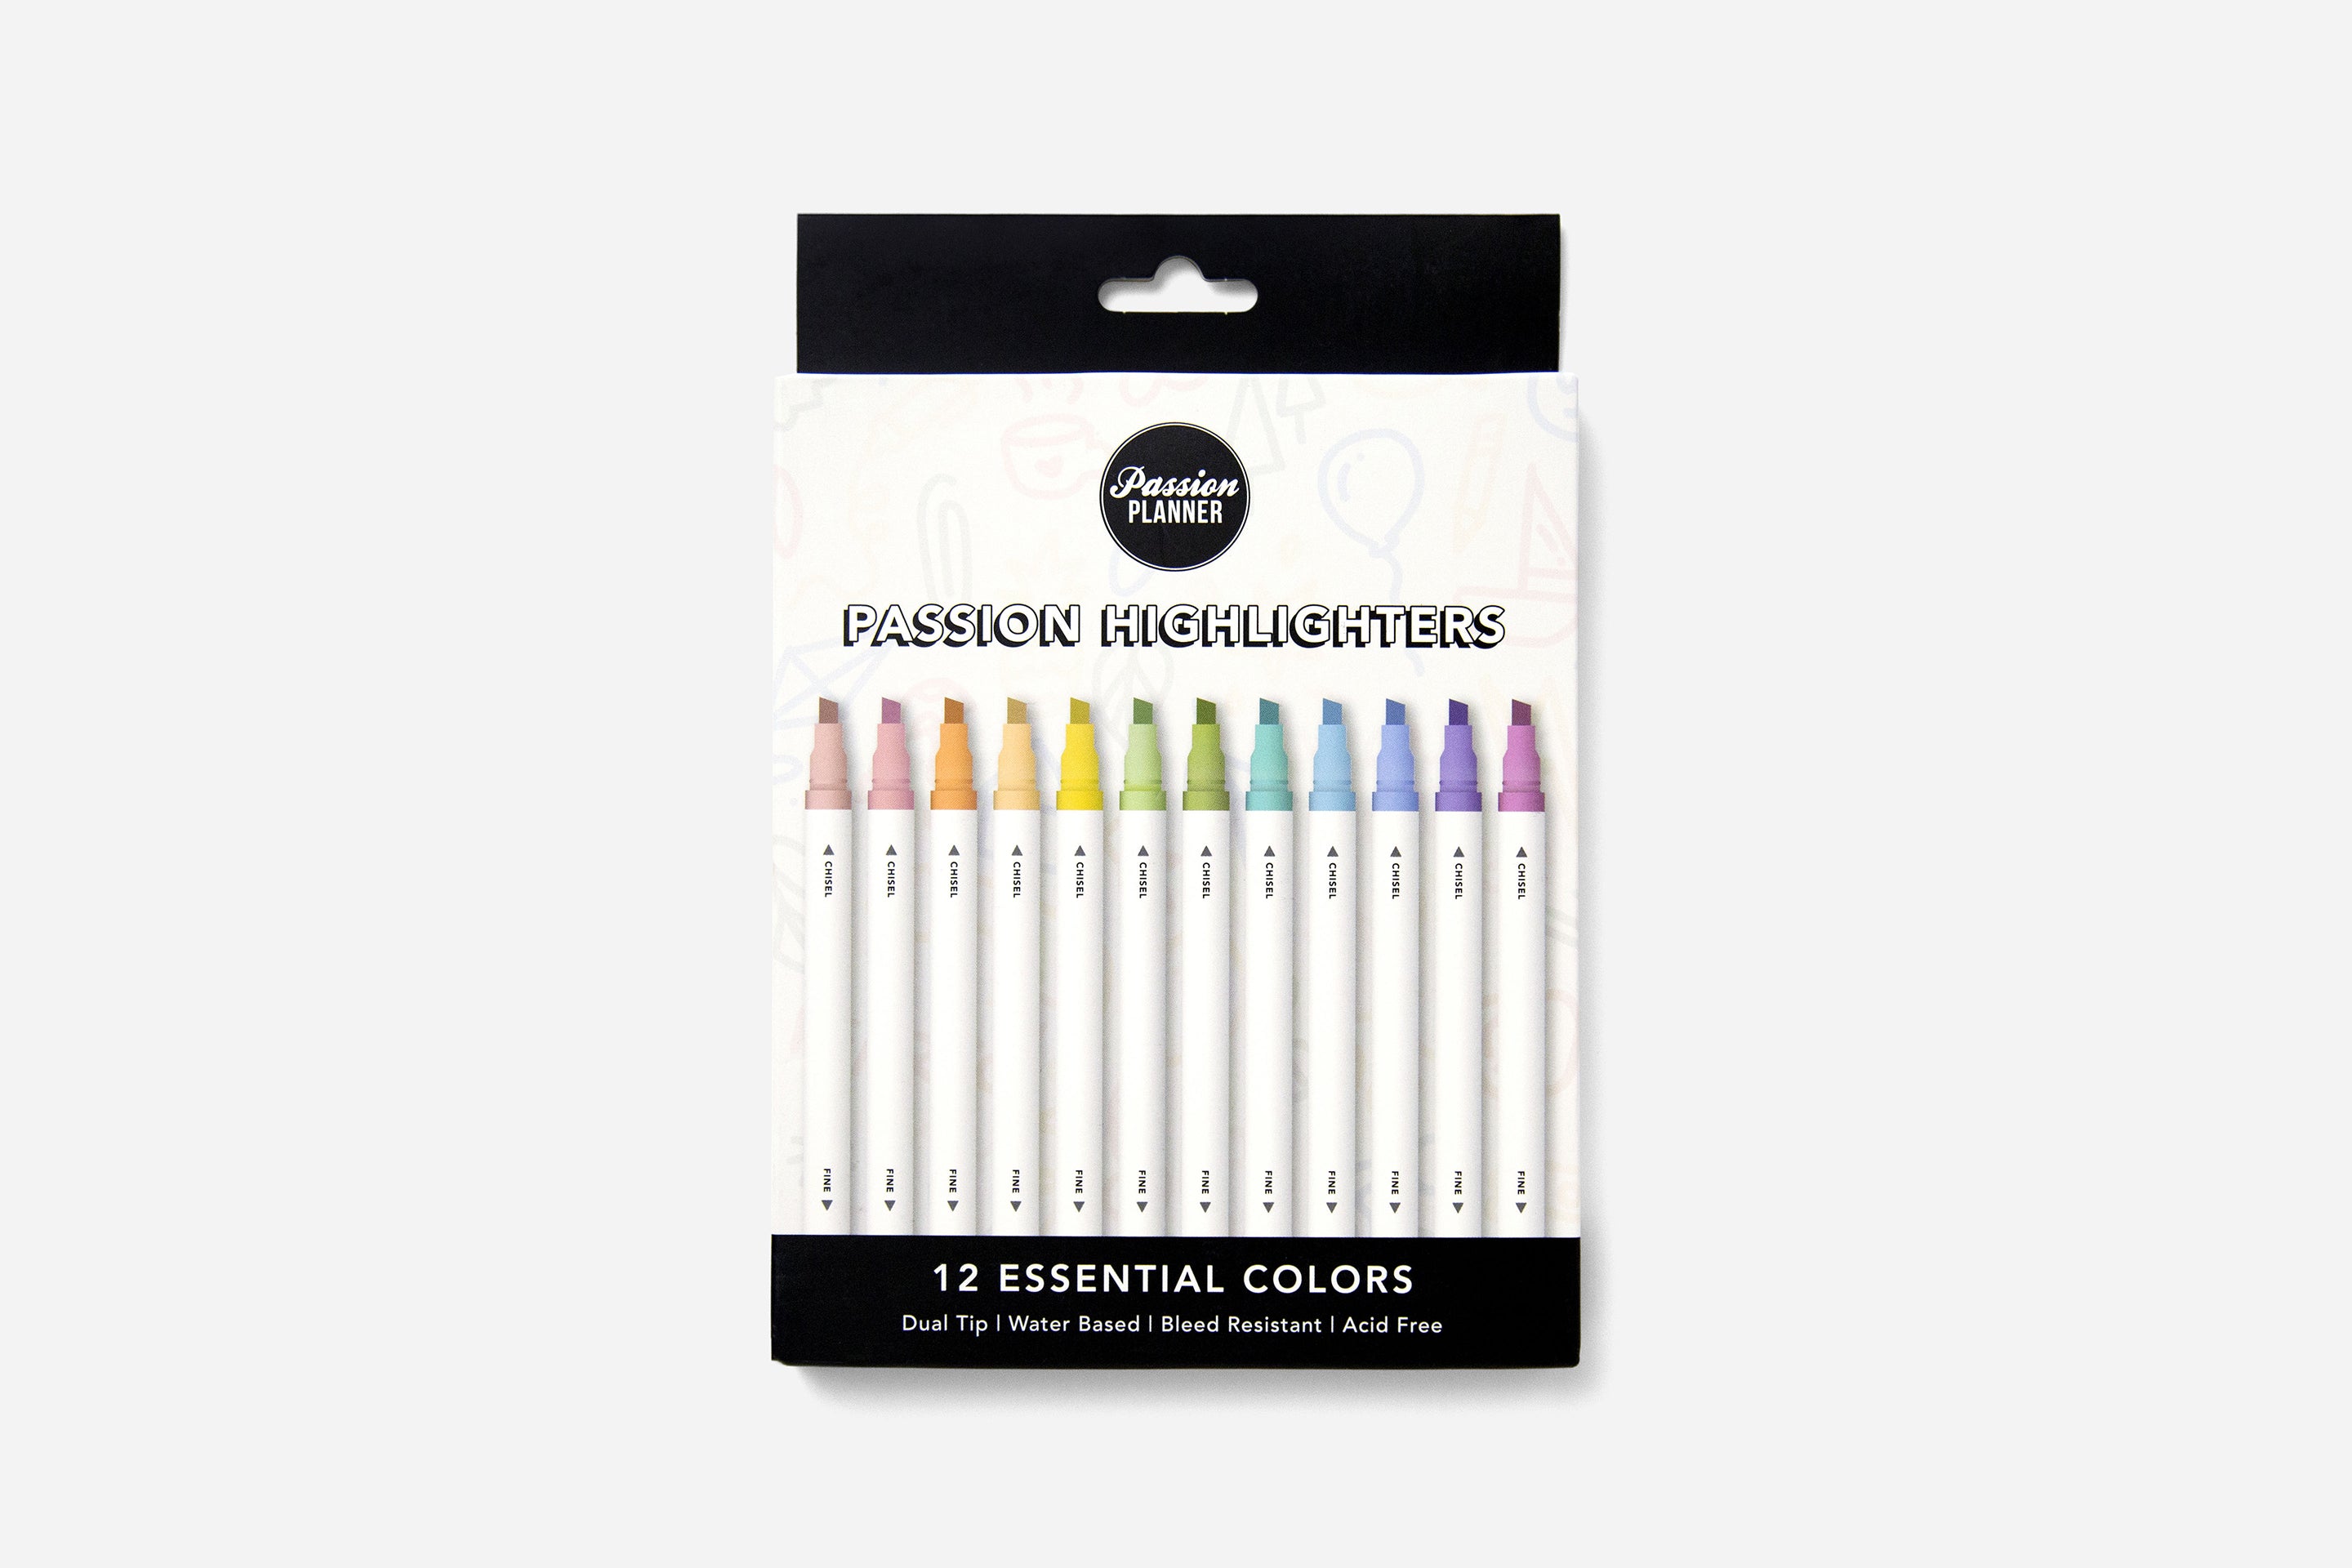 Passion Highlighters - Essentials (12-pack) - Passion Planner